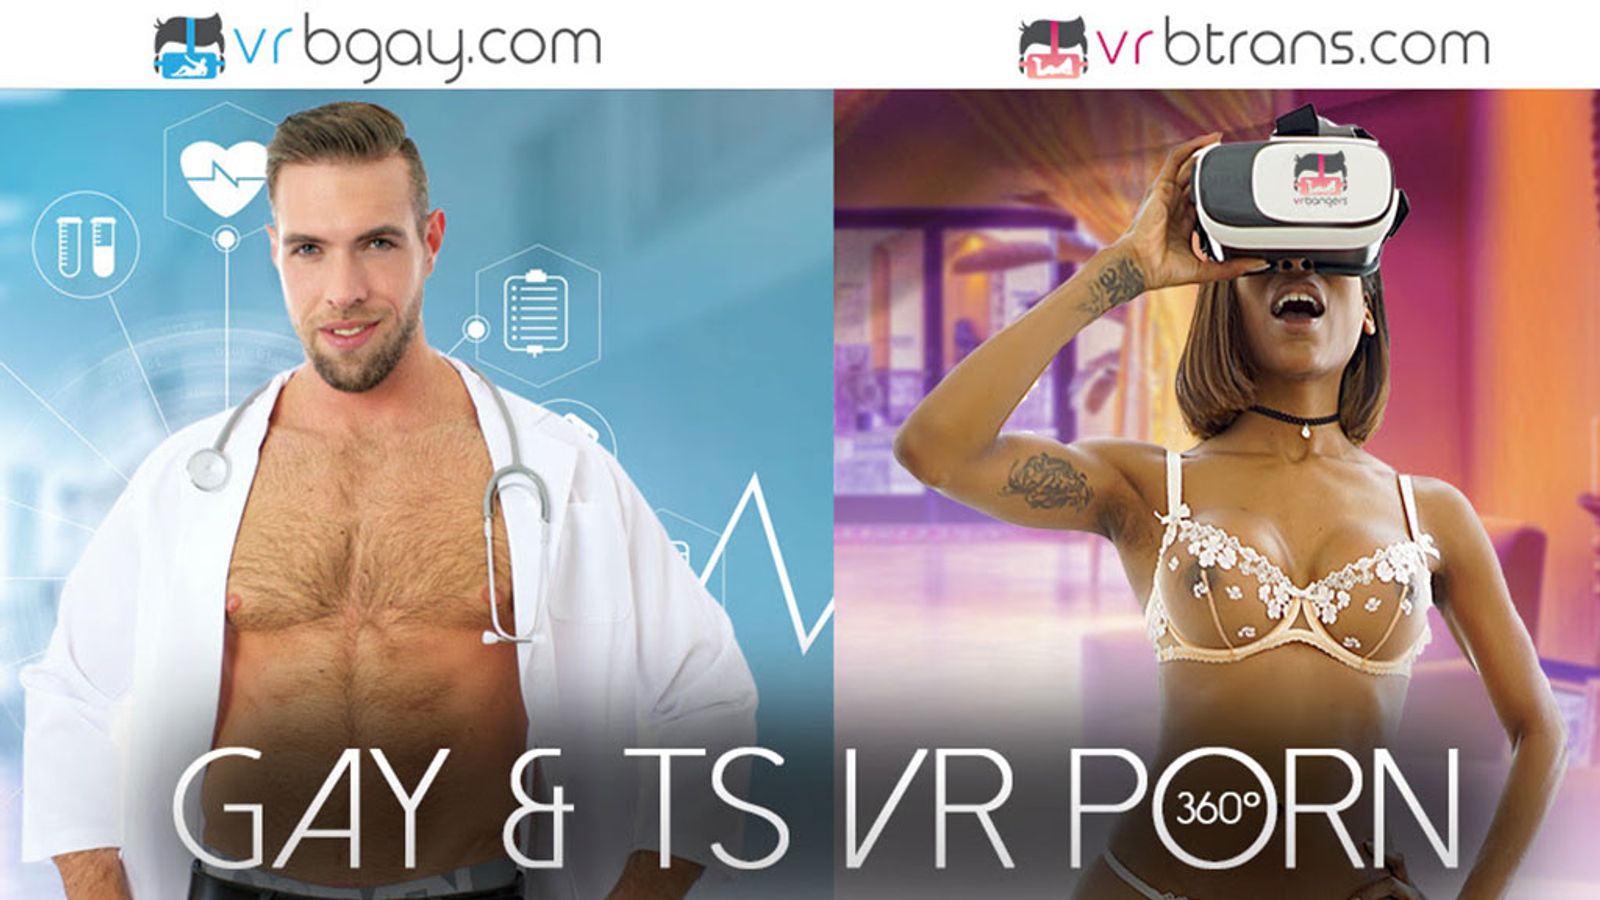 VR Bangers Now Offering 360 Degree Gay, Trans Content